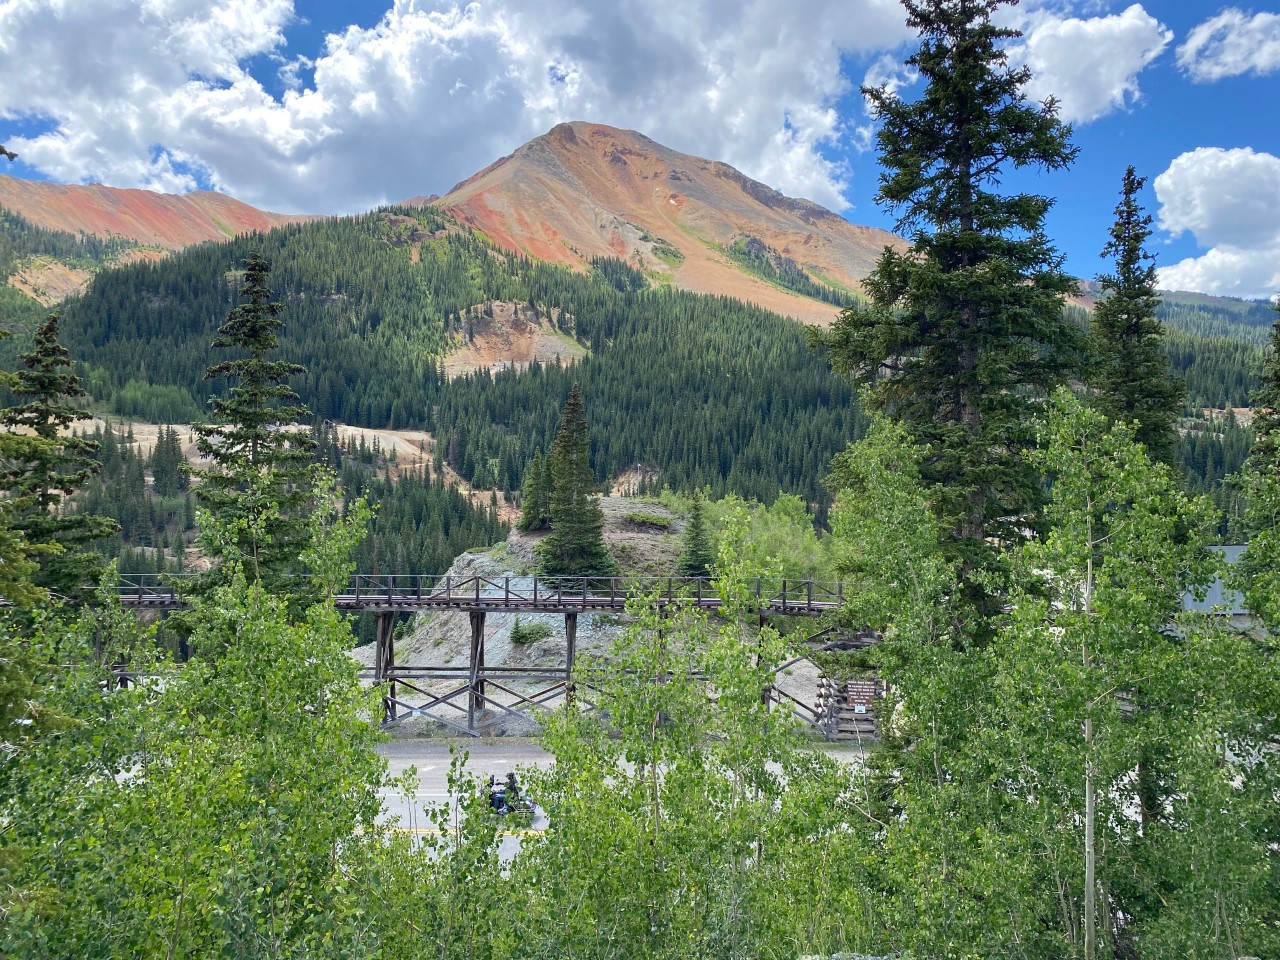 Red Mountain Mining District: Below a 5.5 mile underground tunnel connected Idarado Mine with Telluride, Colorado.